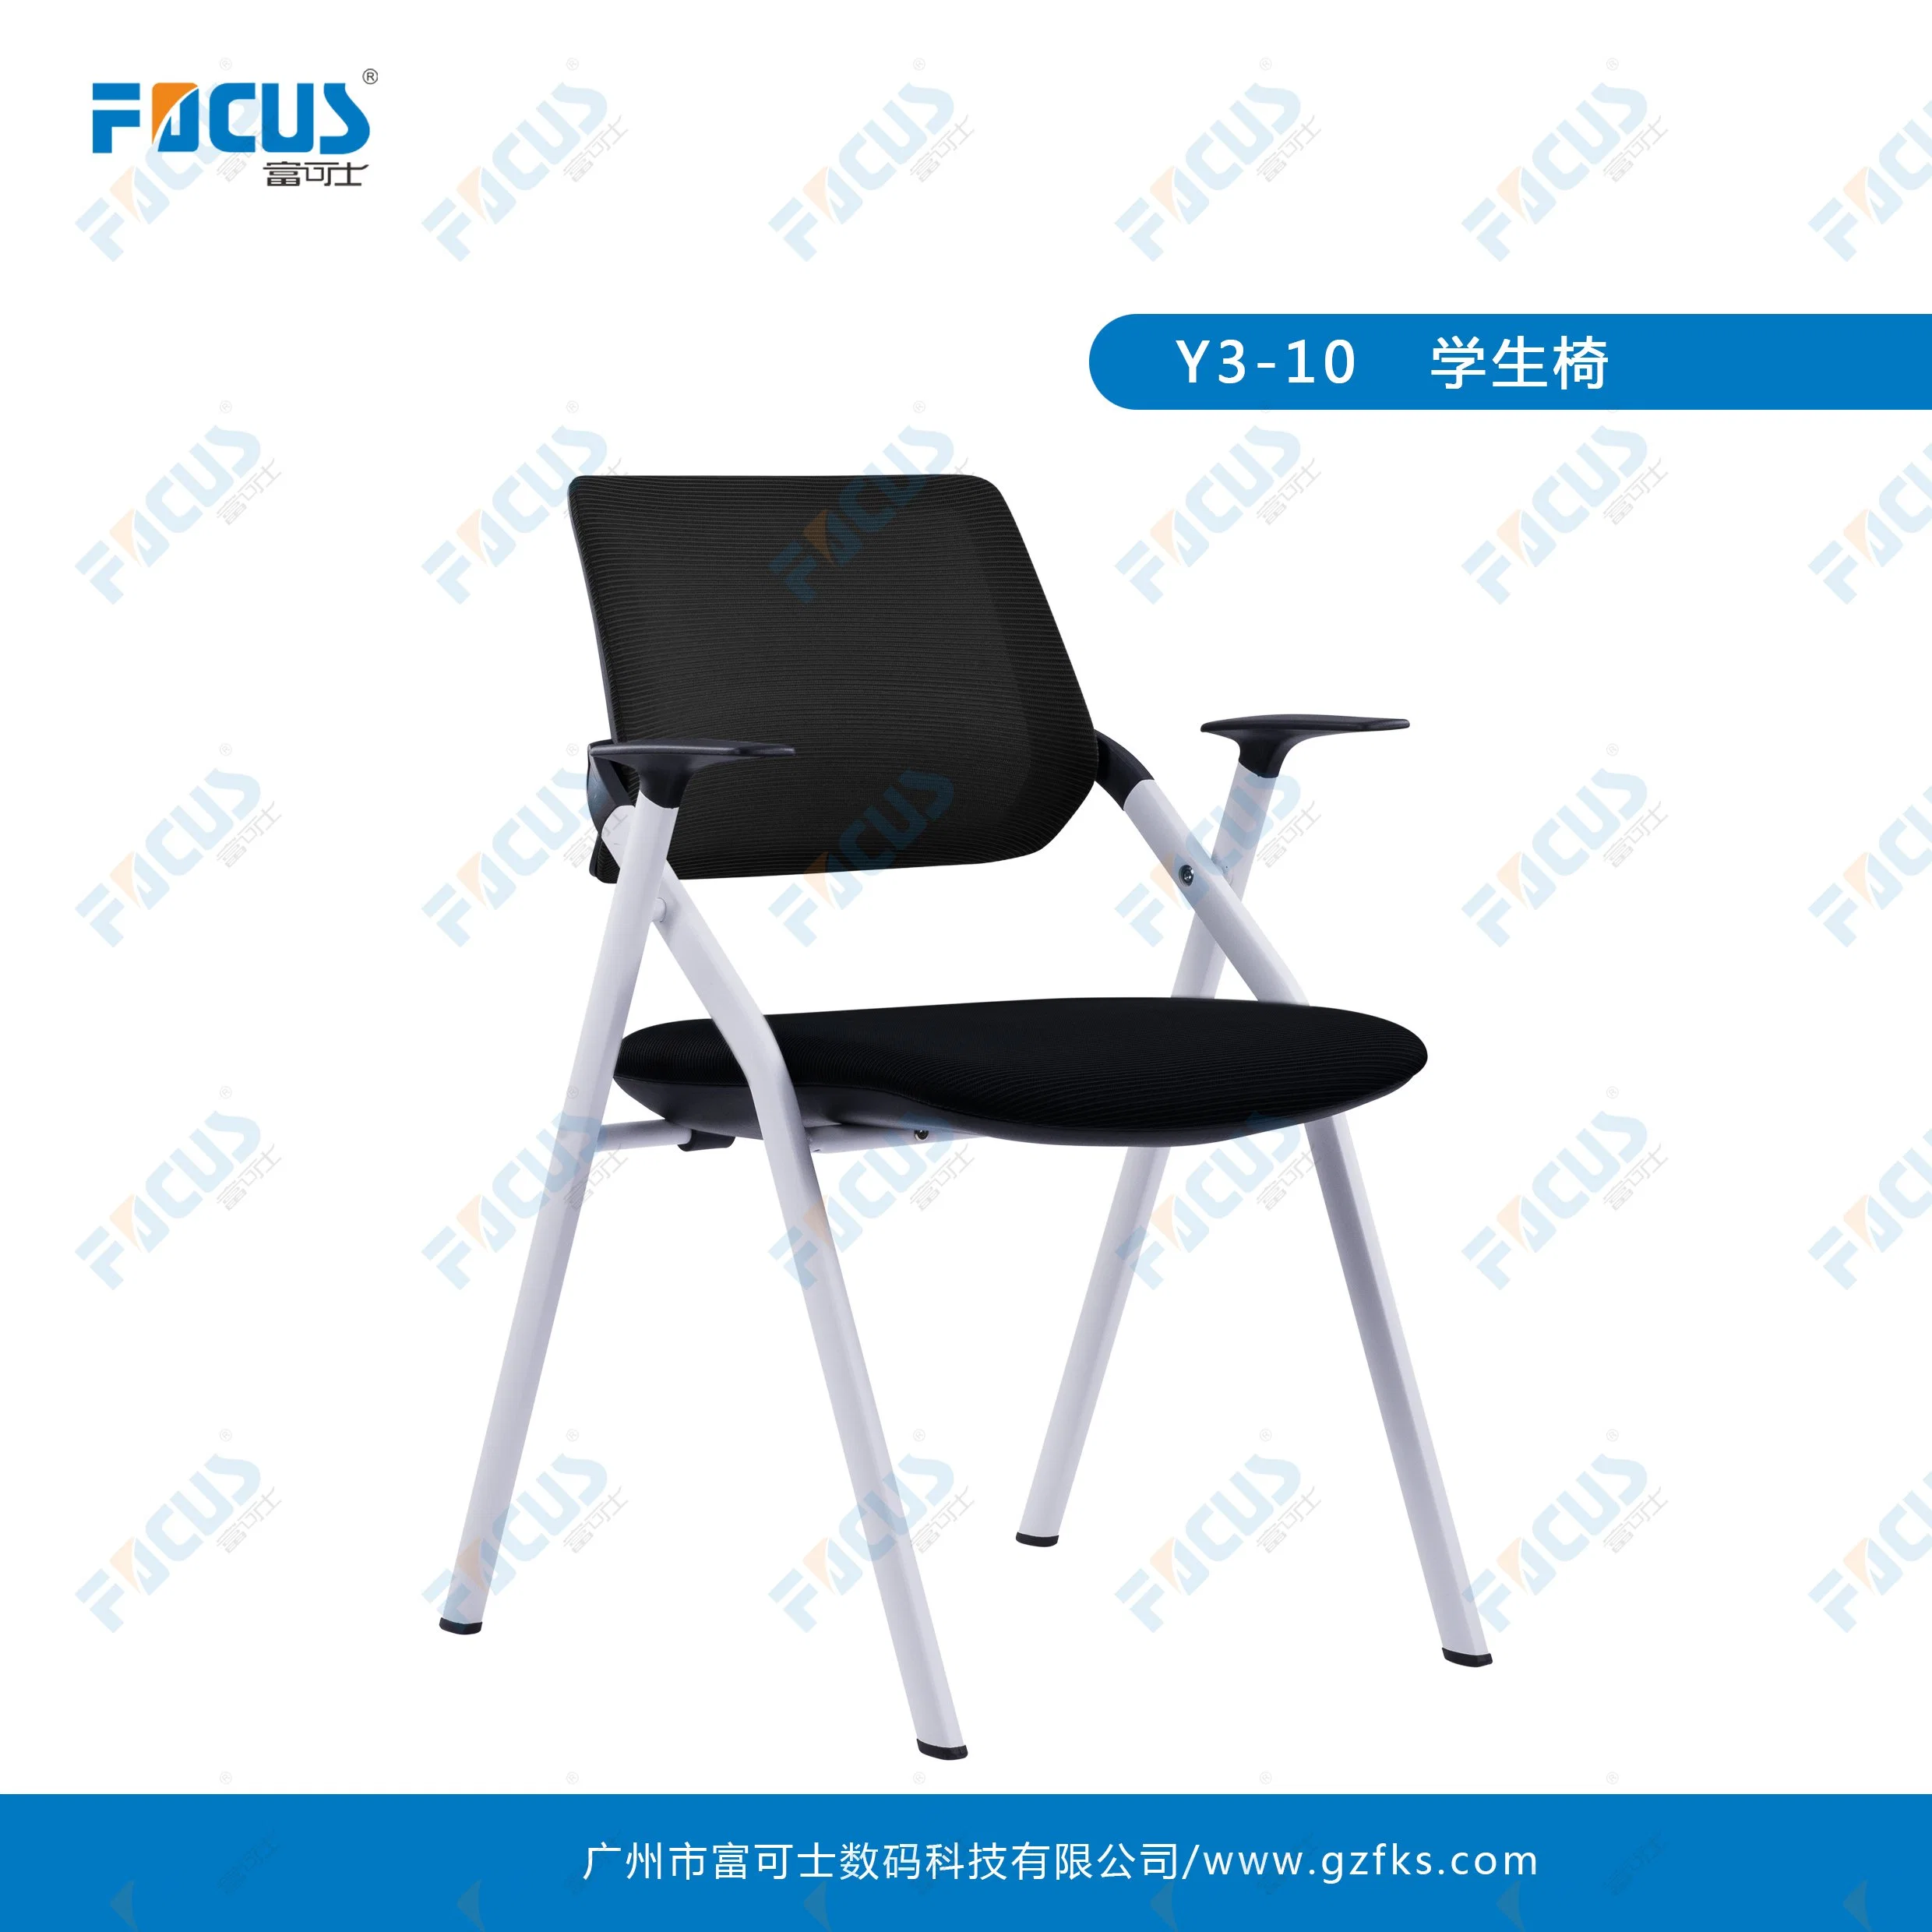 Training Chair; Conference Room Chair Hall Waiting Chair; Foldable Student Chair